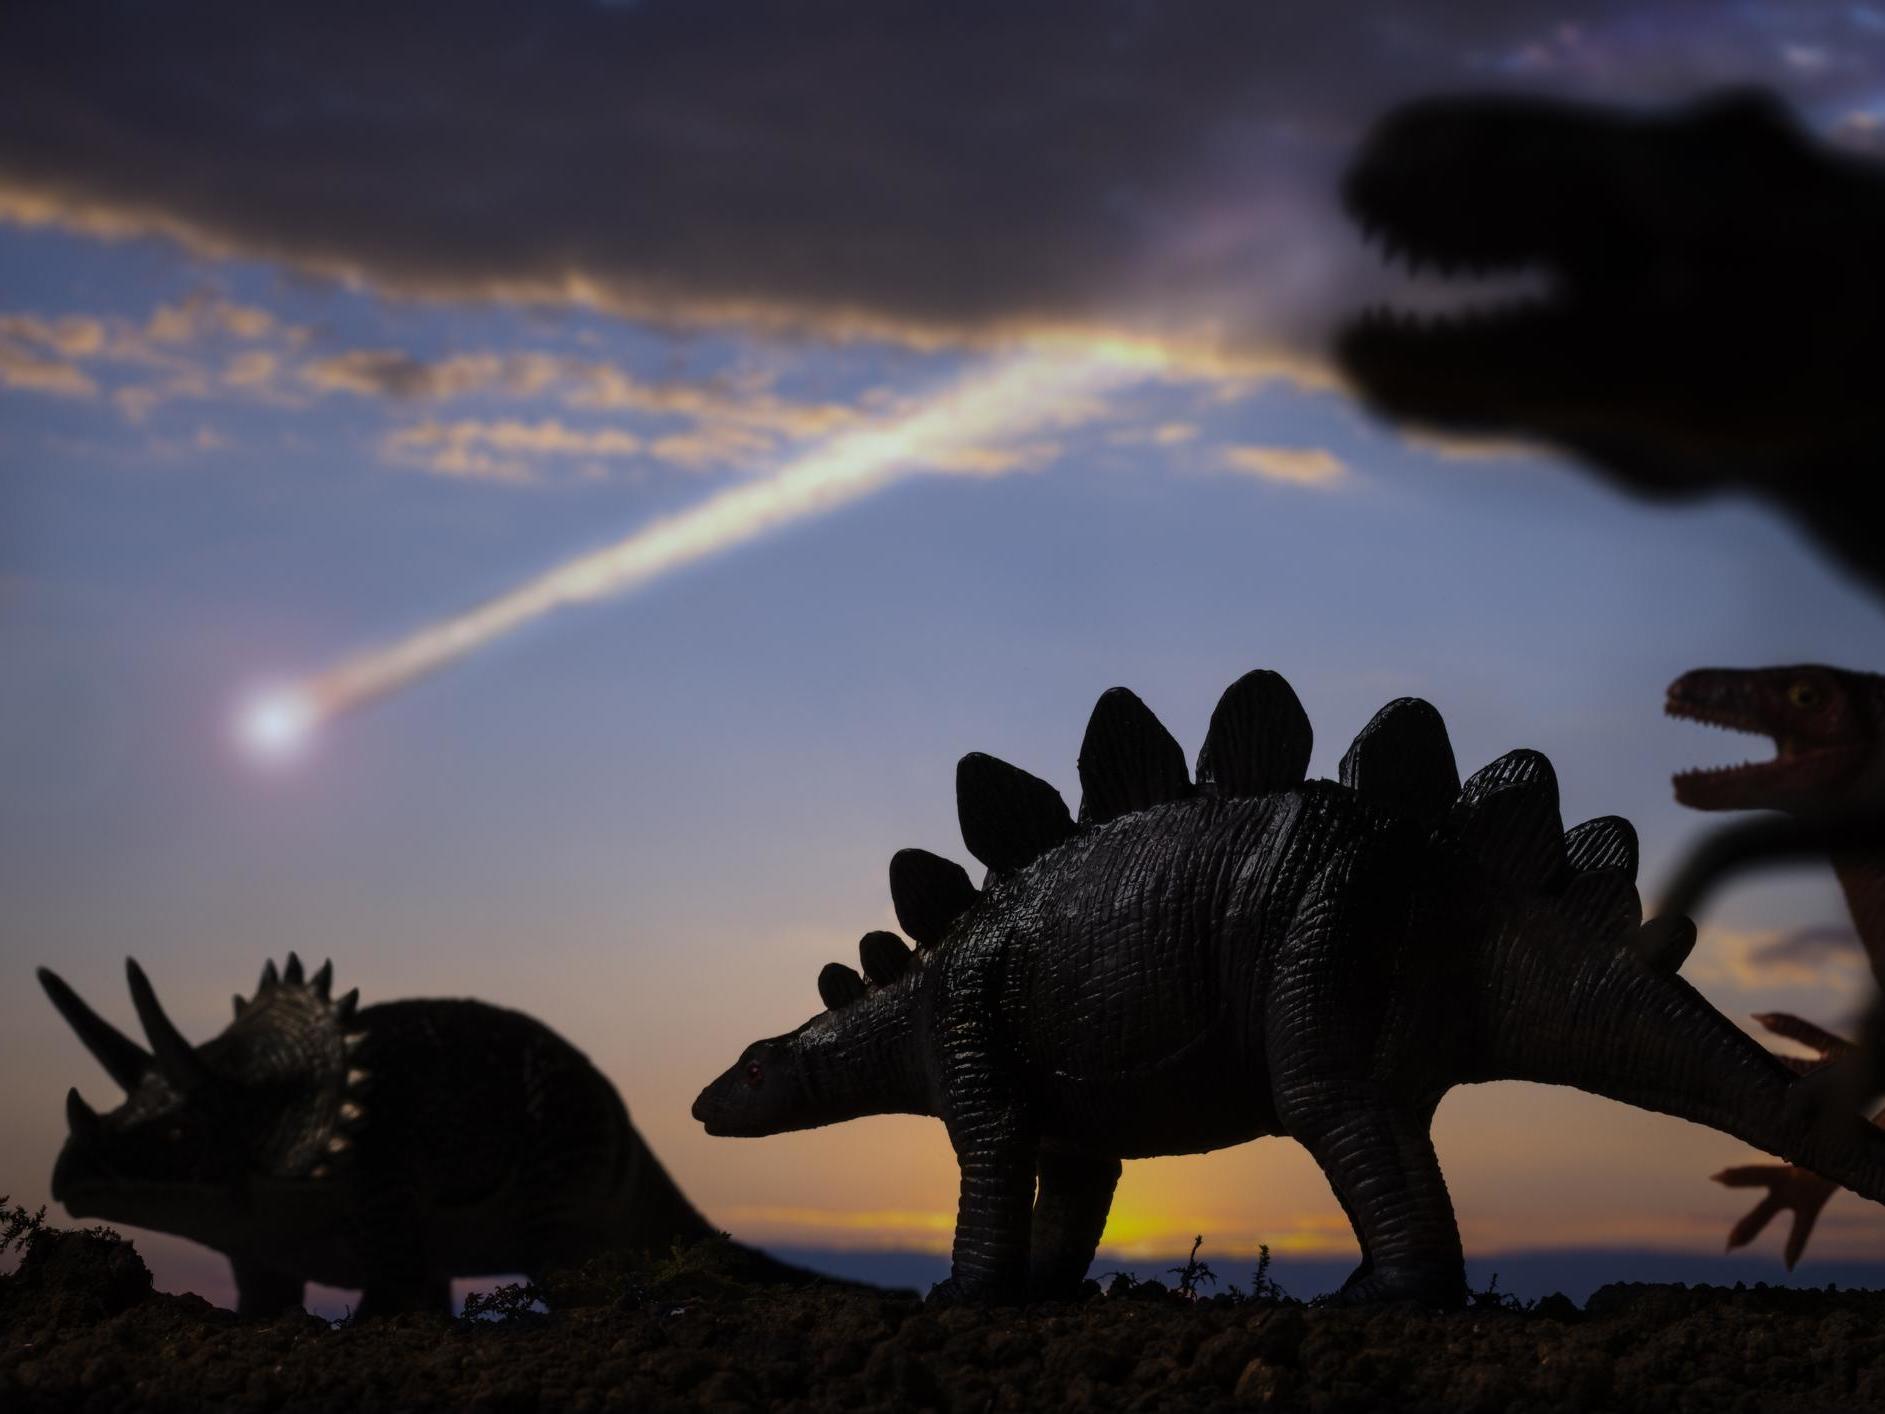 About three-quarters of plant and animal species were made extinct after an asteroid strike on Earth